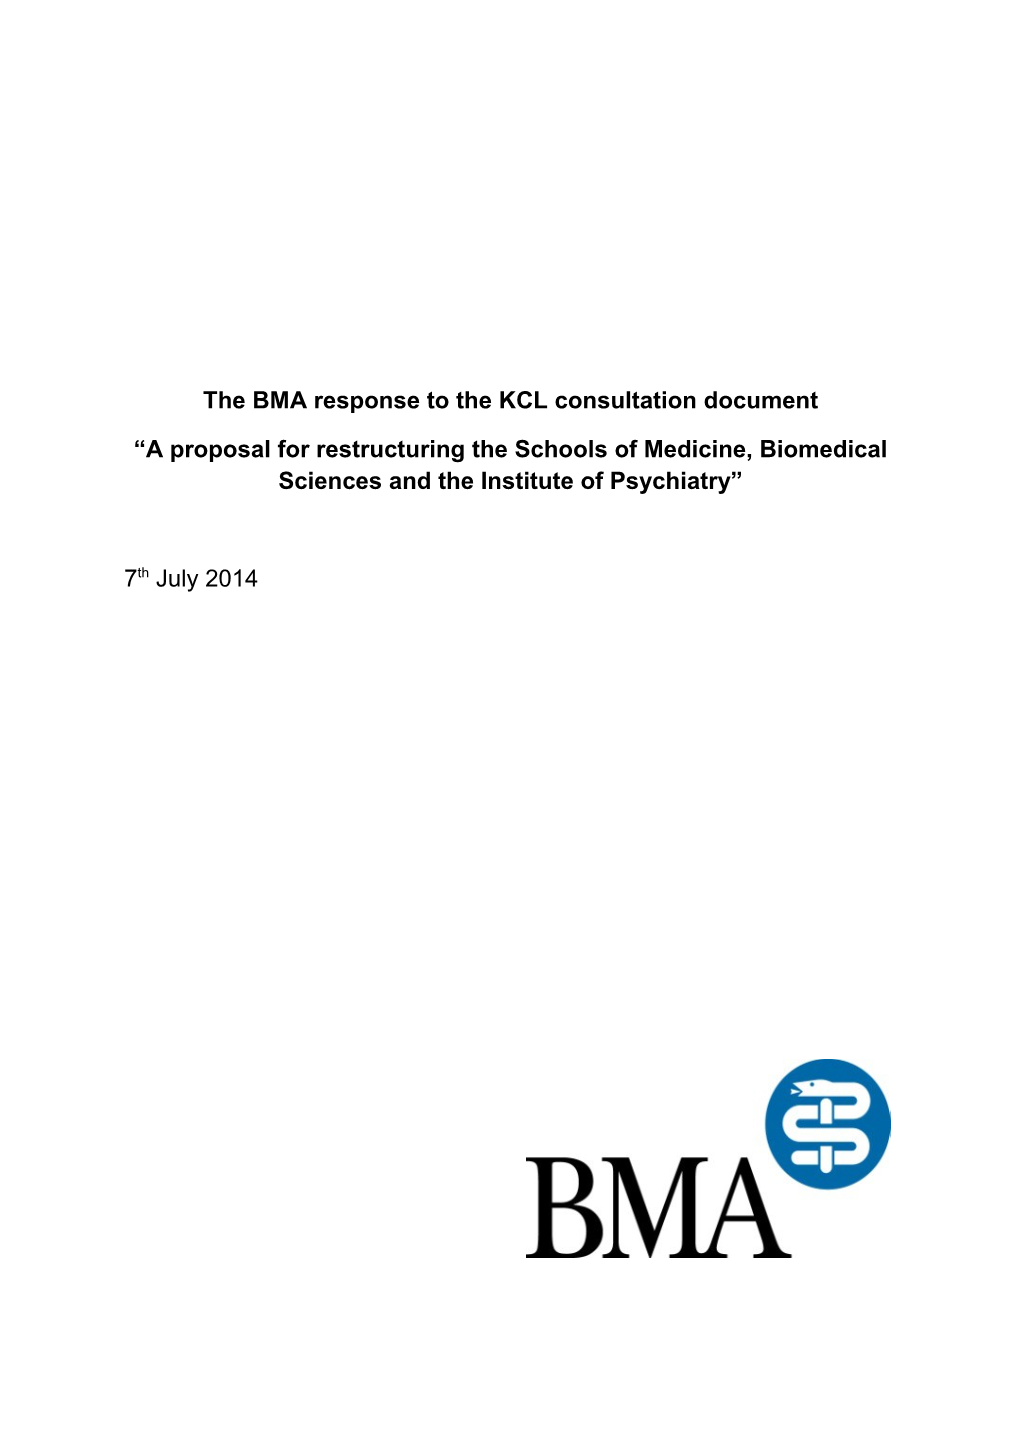 The BMA Response to the KCL Consultation Document